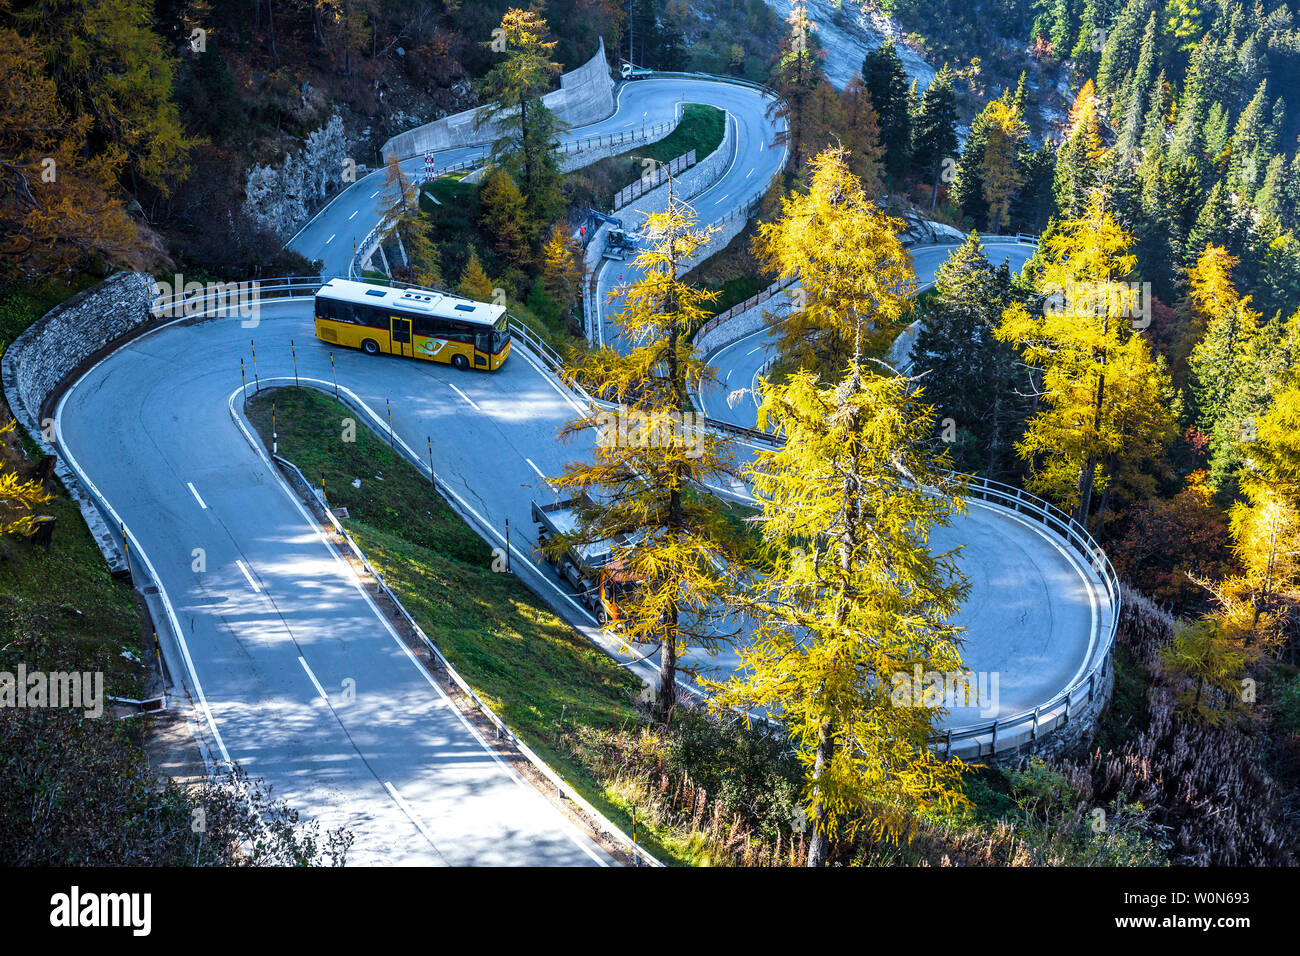 Malaga pass, Swiss Alpes. Spectacular curves in the landscape. Stock Photo